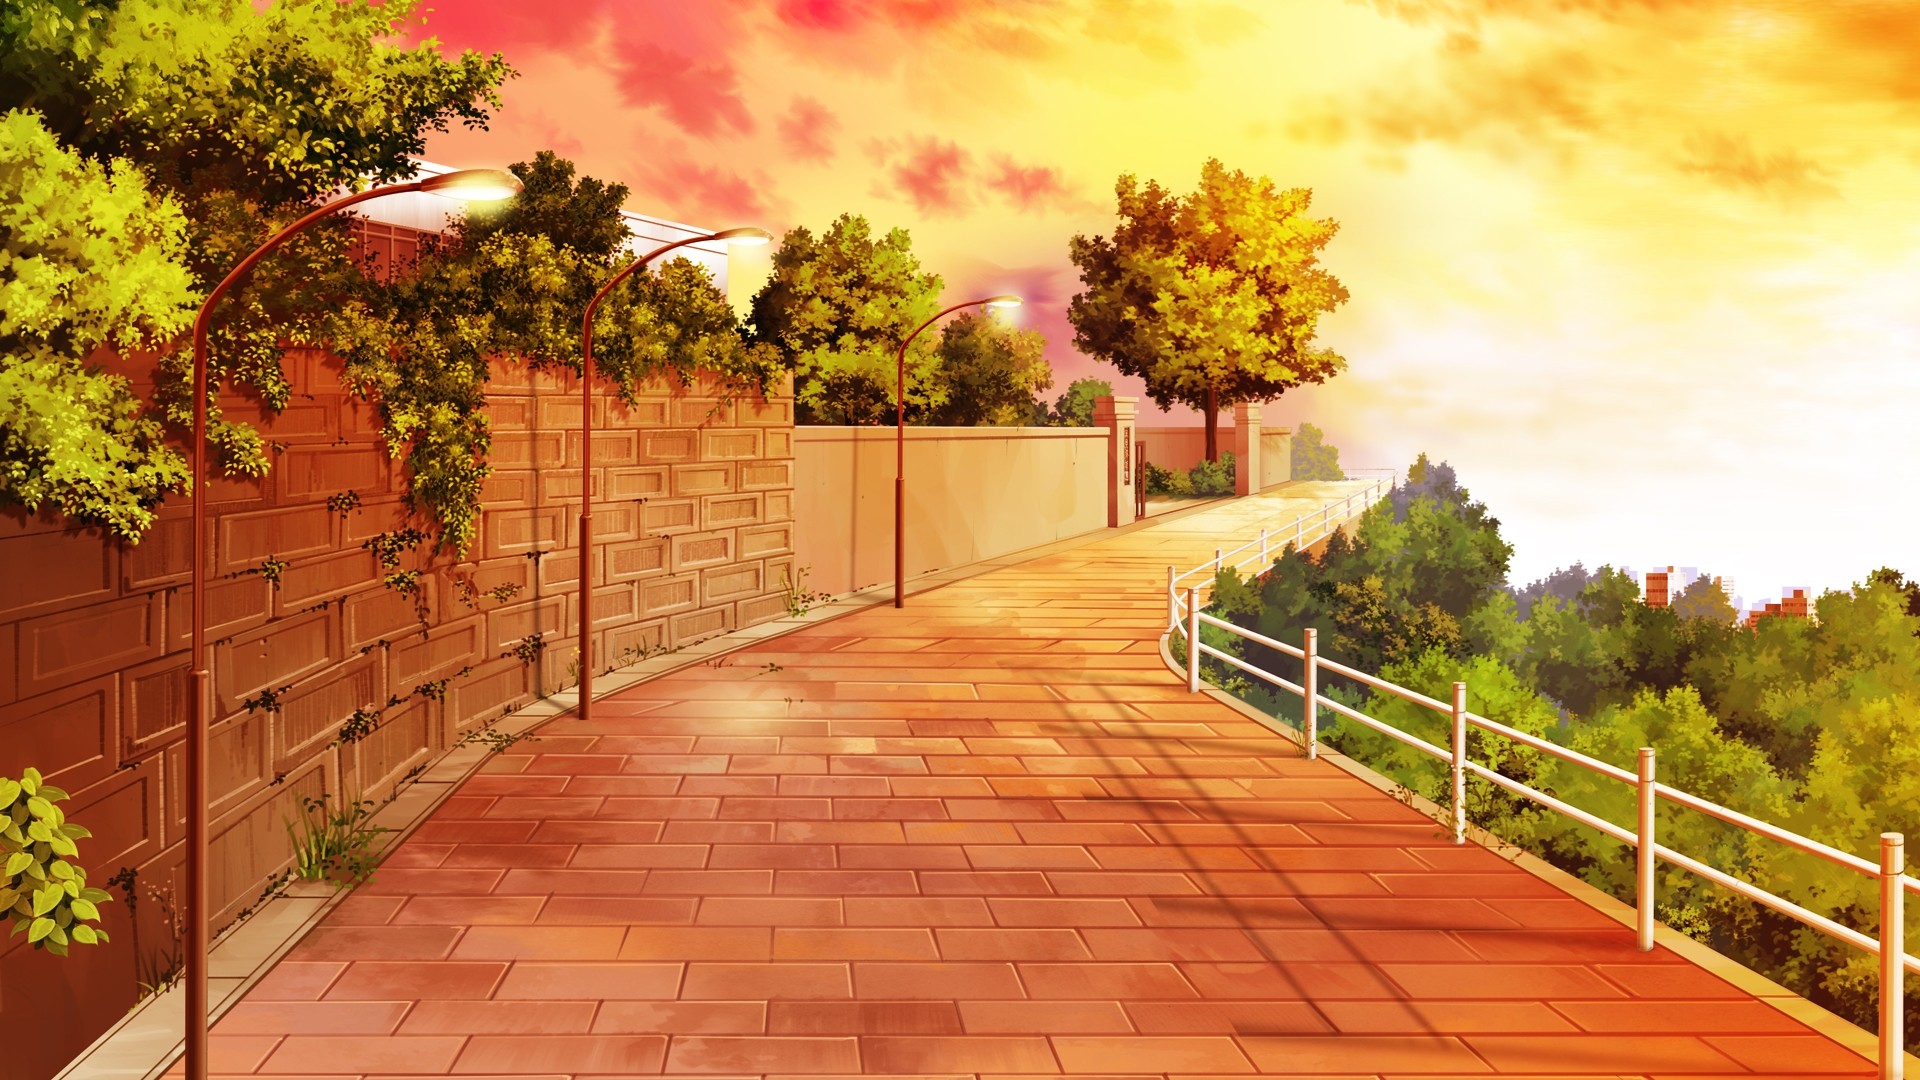 Beautiful Anime Landscapes Wallpapers